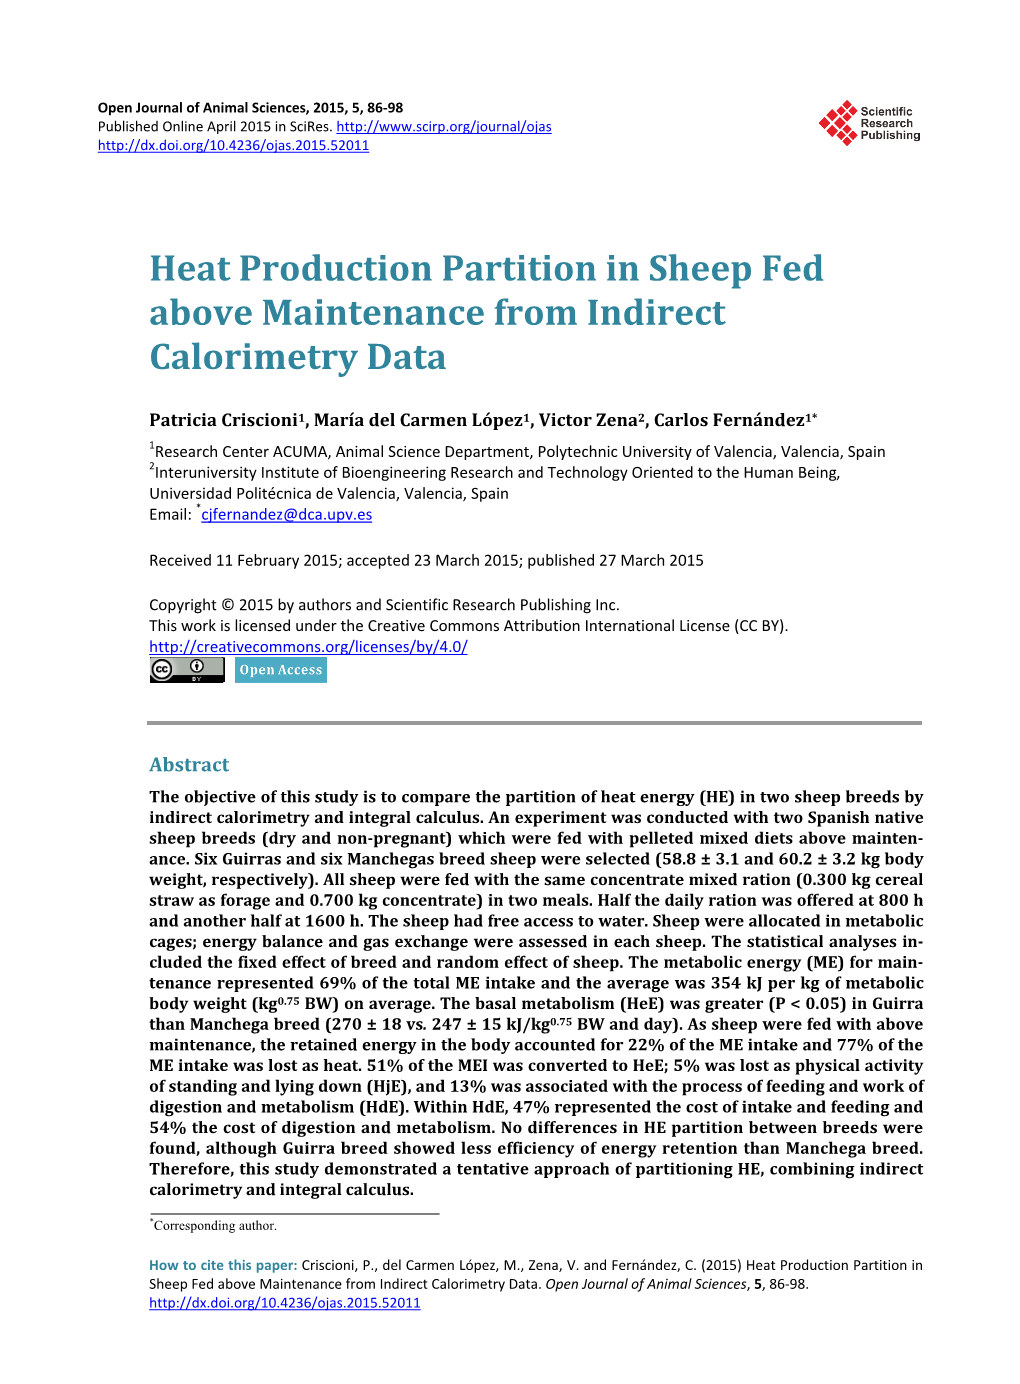 Heat Production Partition in Sheep Fed Above Maintenance from Indirect Calorimetry Data